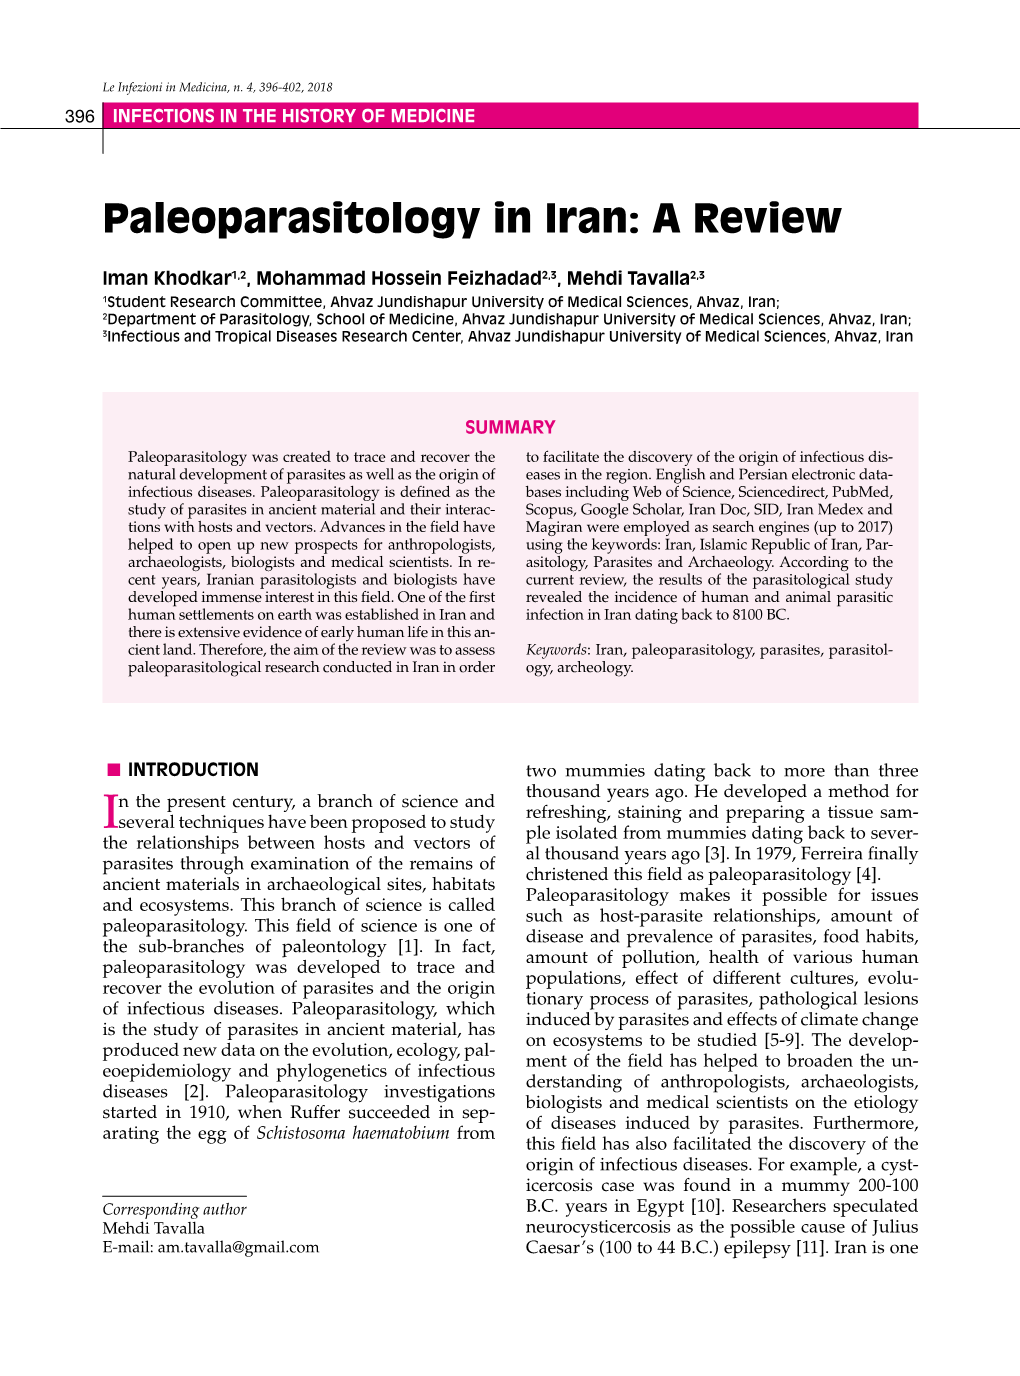 Paleoparasitology in Iran: a Review